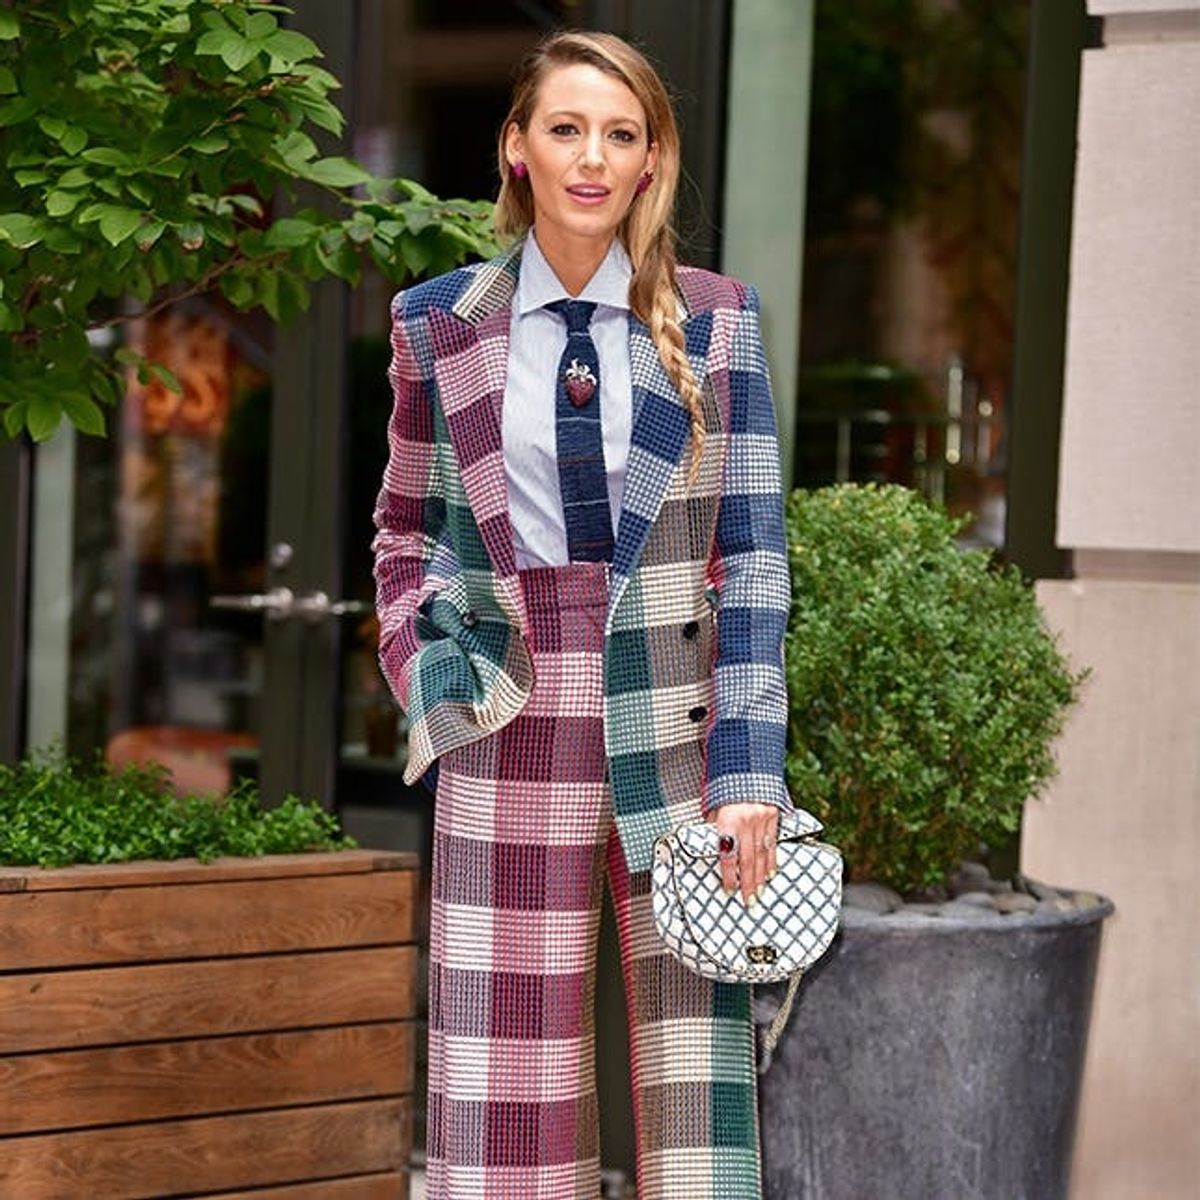 Blake Lively’s ‘A Simple Favor’ Press Tour Is a Lesson in Power Dressing